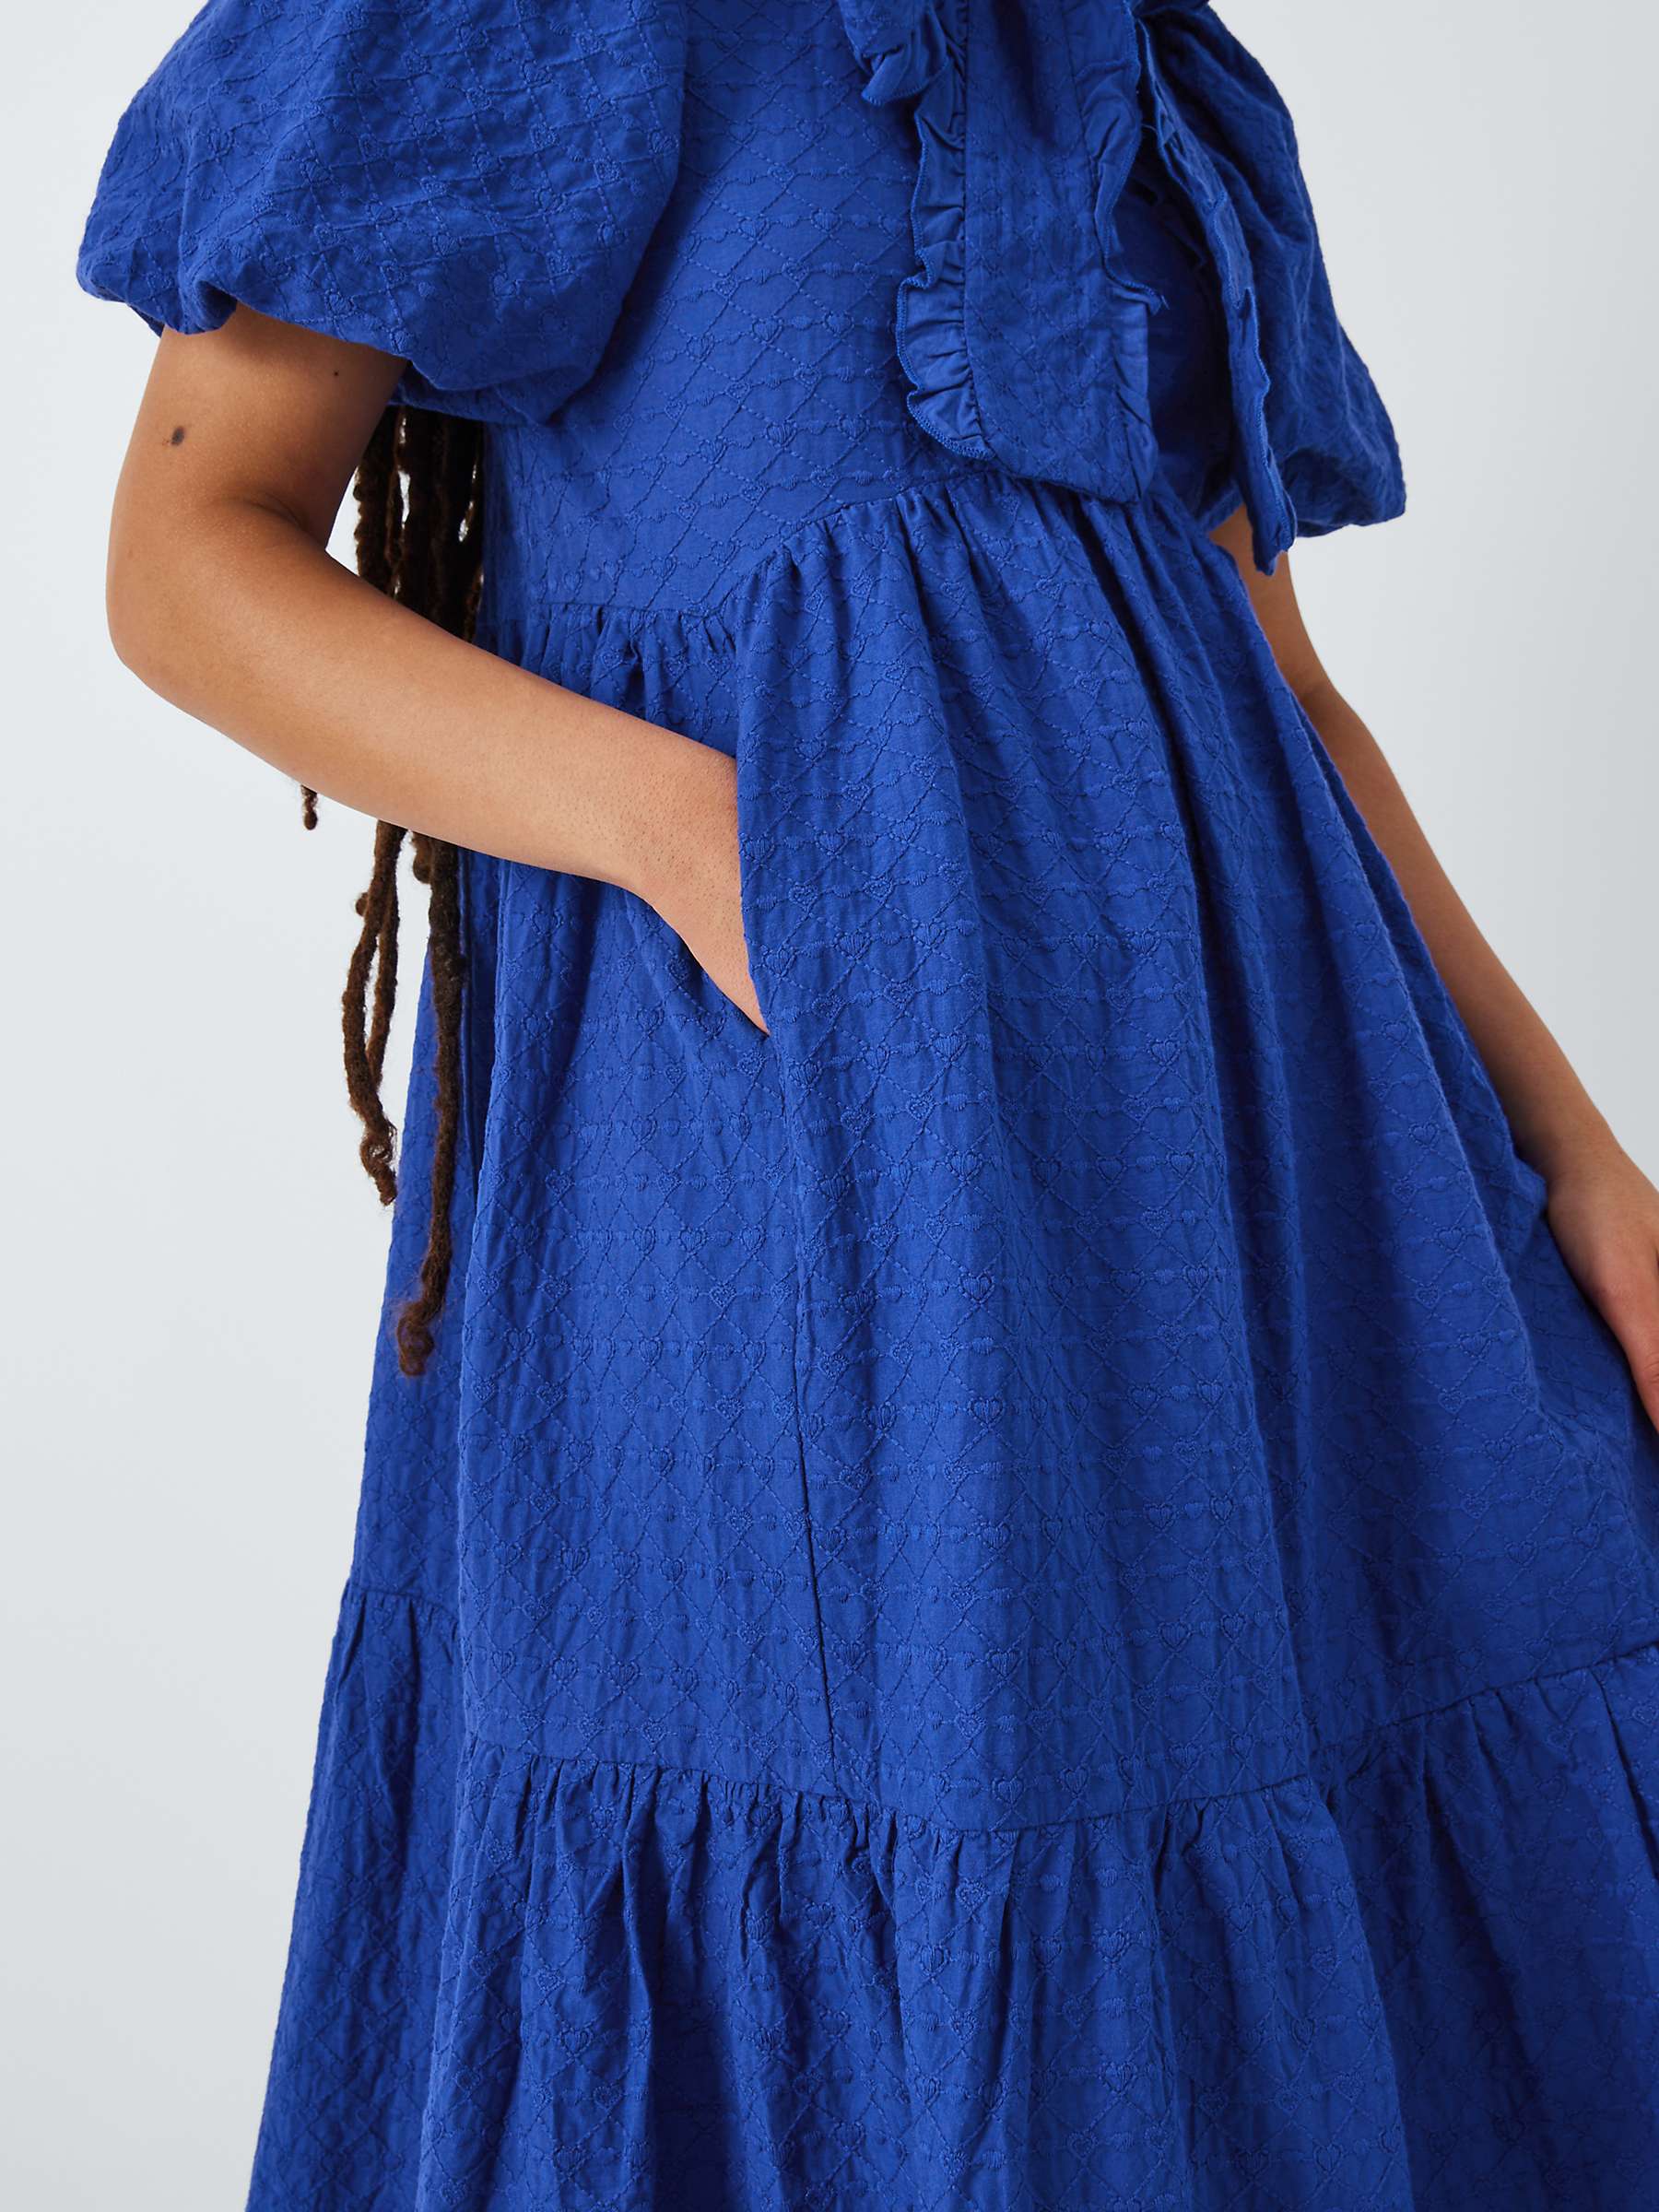 Buy Sister Jane Blueberry Bow Tiered Midi Dress, Blue Online at johnlewis.com